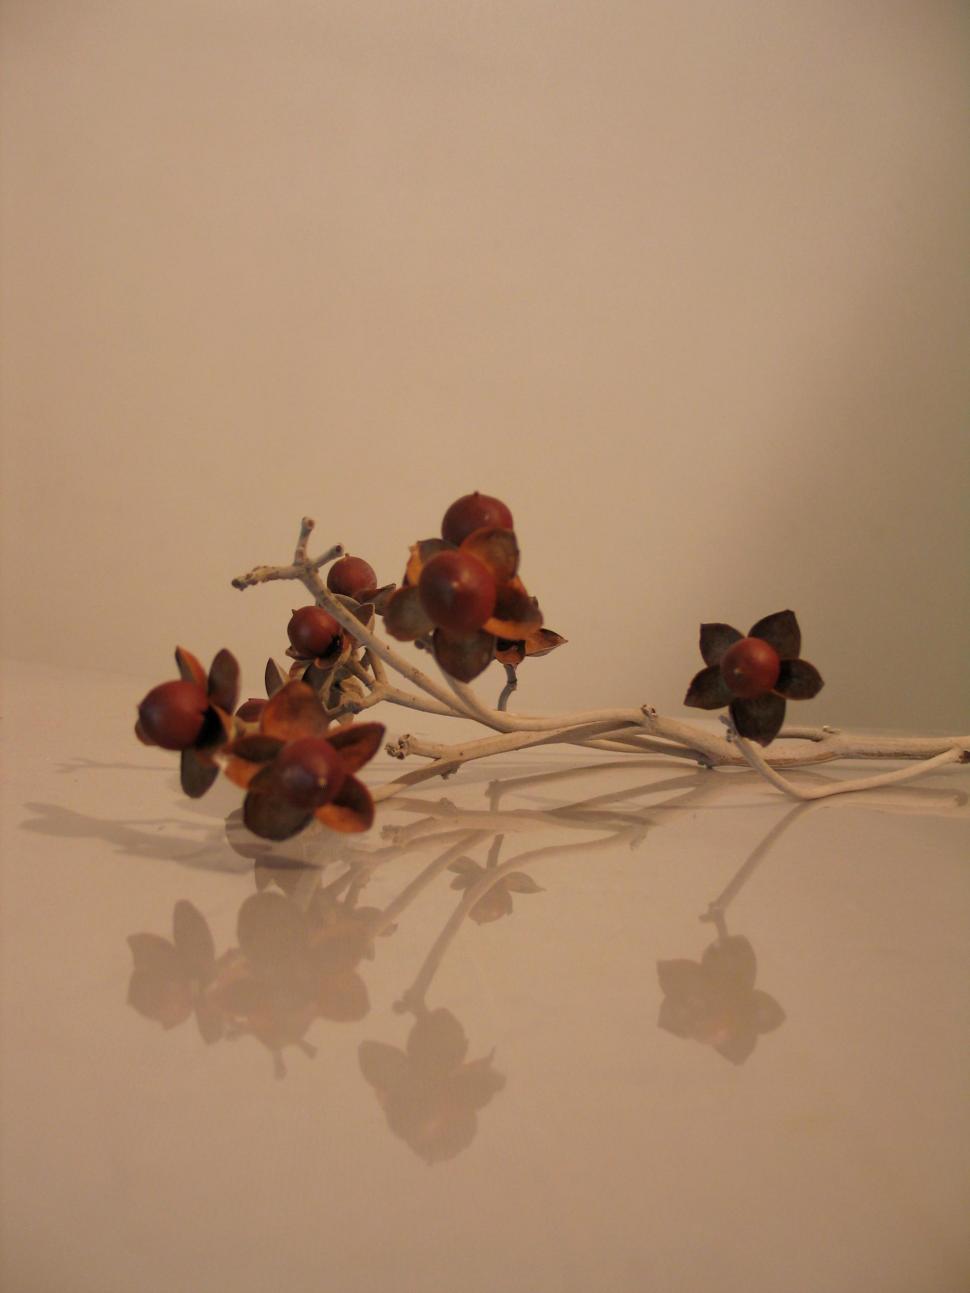 Free Image of Dead Flowers on Table 